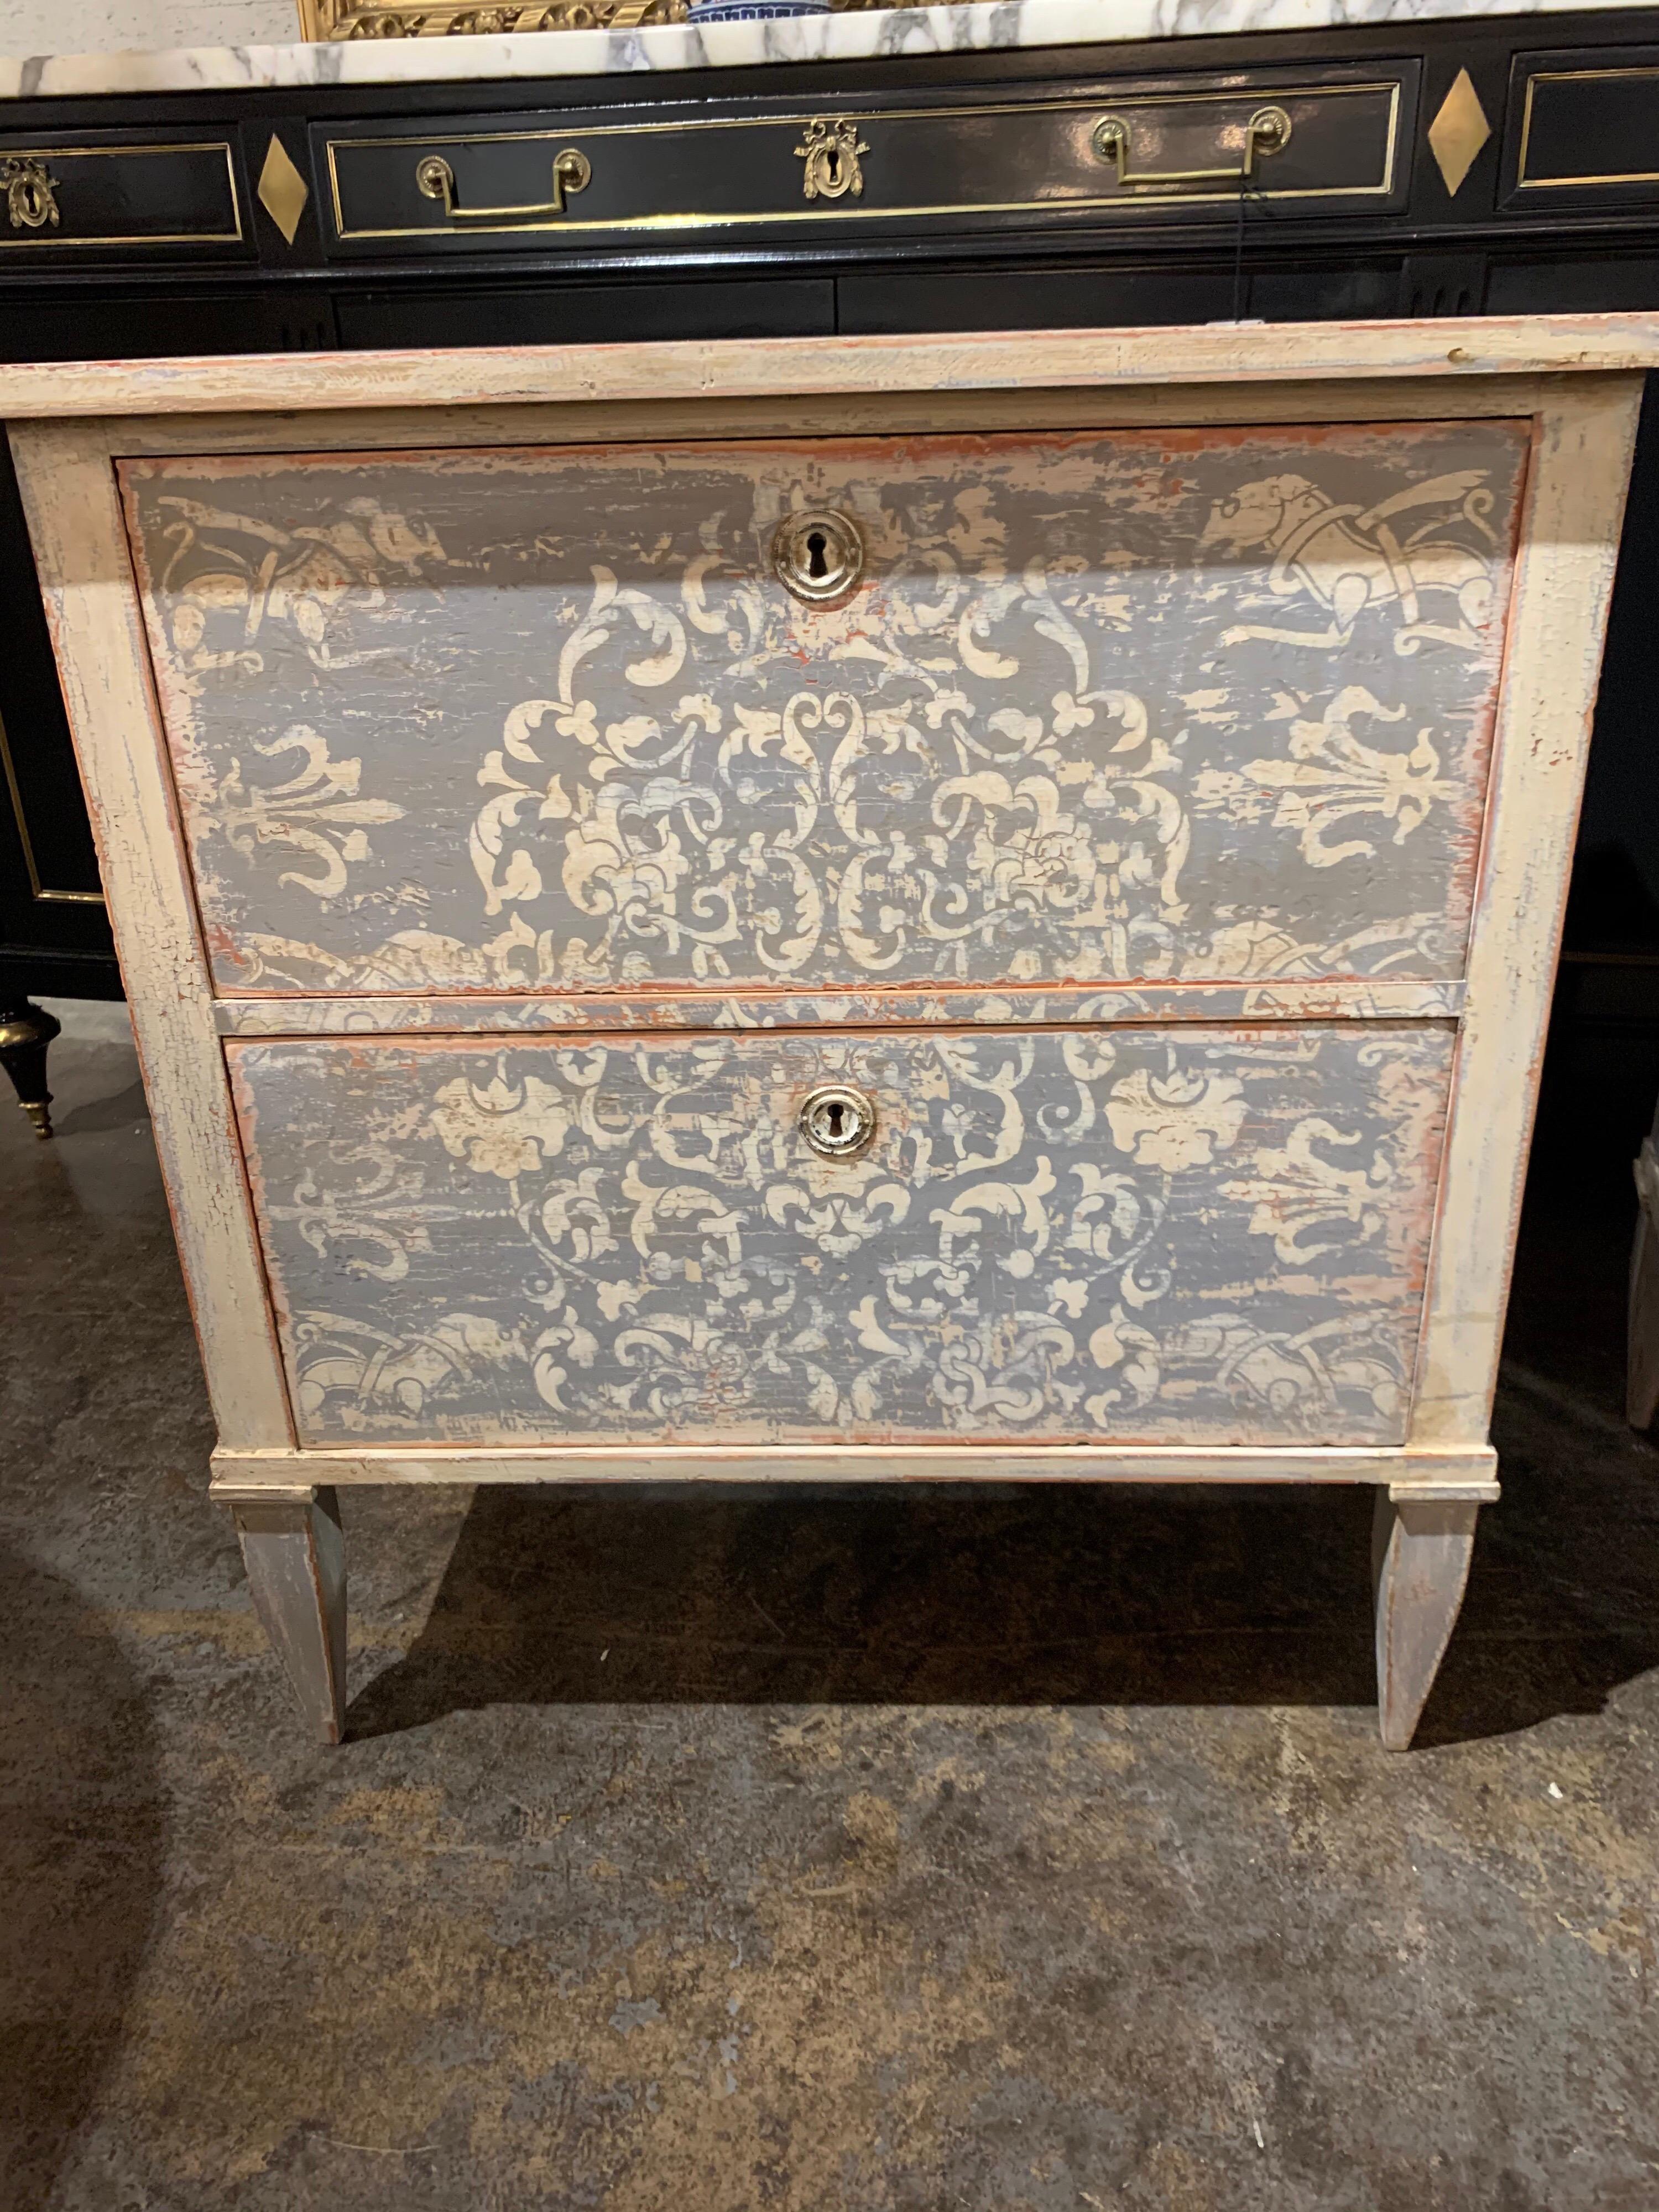 Beautiful pair of painted 2-drawer bedside tables. This set has a lovely decorative neoclassical design painted in grey on the drawers. Very unique! Note: There is a chest of drawers with pattern as well if you want to complete the set.